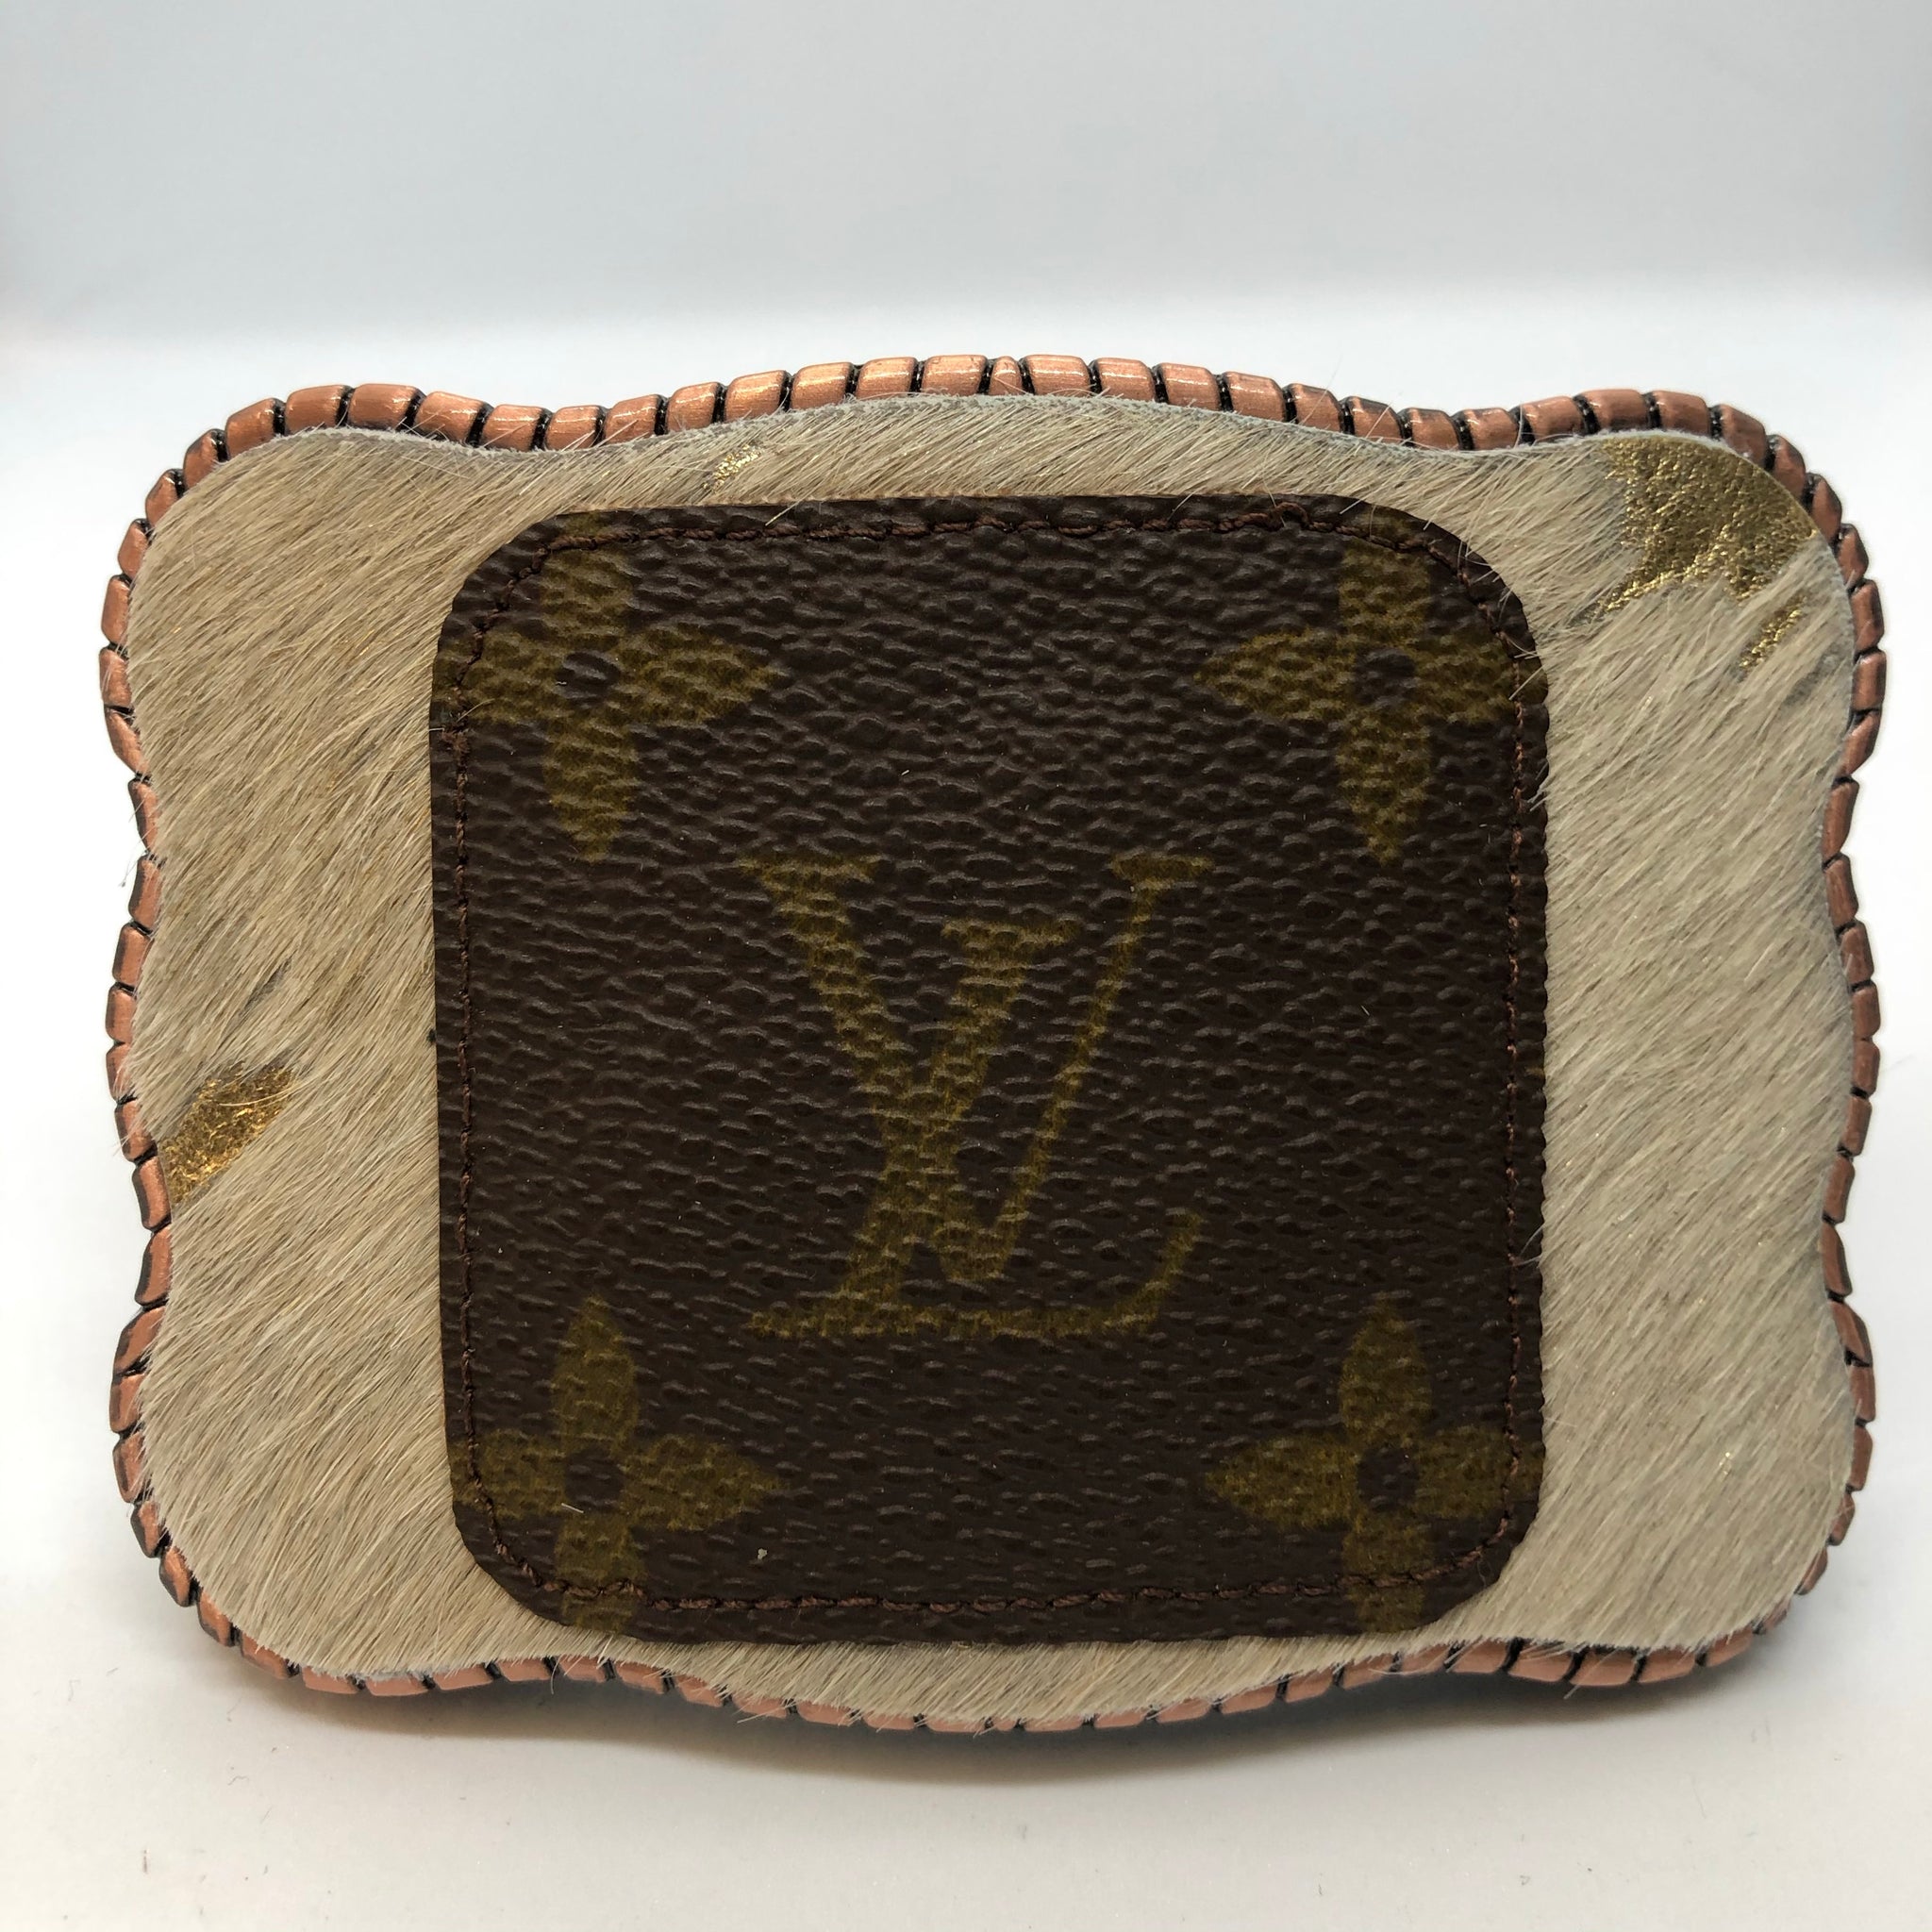 Authentic LV swatch on Metallic Cowhide - Wallet Buckle